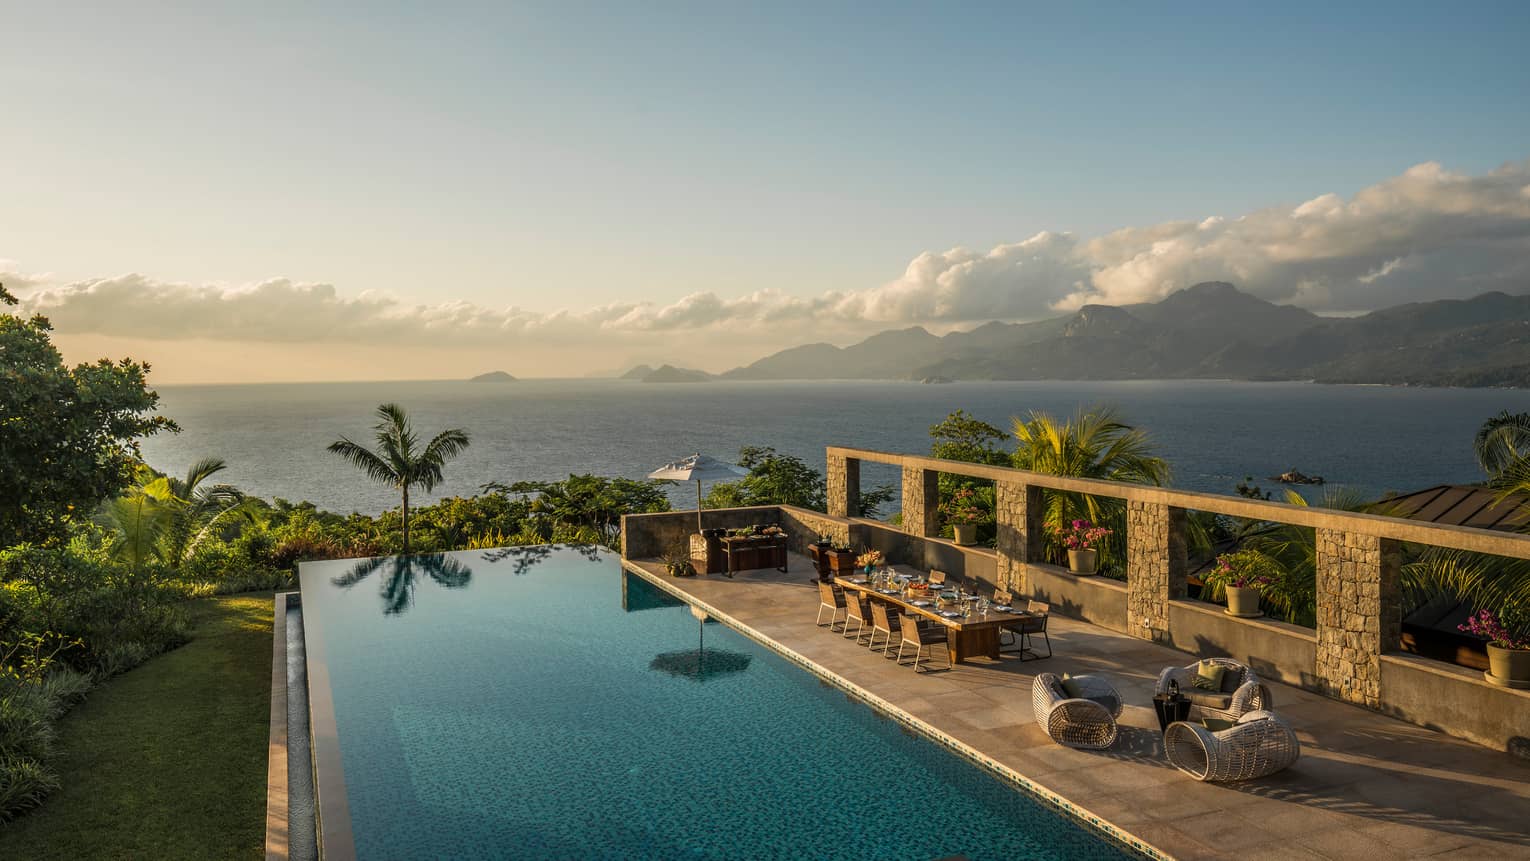 Infinity pool overlooking ocean with palm trees, table, chairs and lounge area 